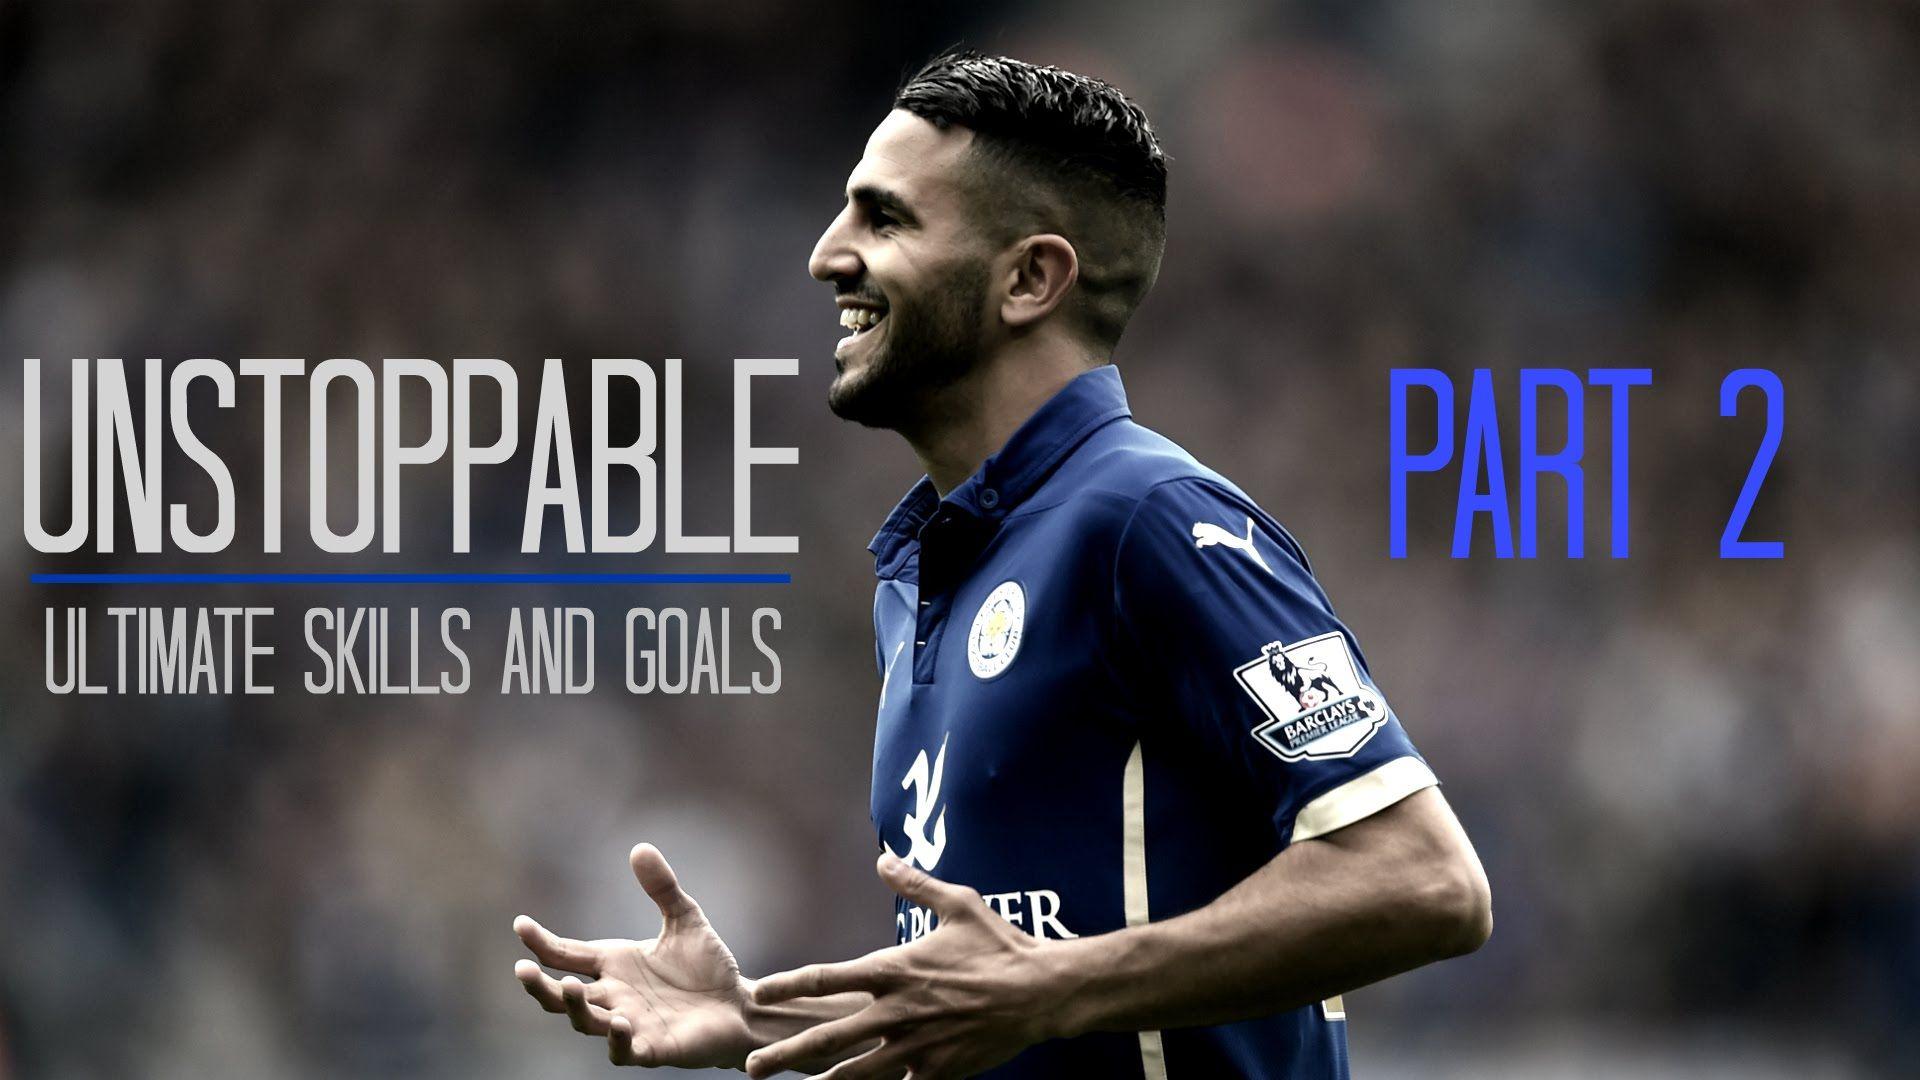 Songs in Riyad Mahrez • Unstoppable • Ultimate Skills and Goals